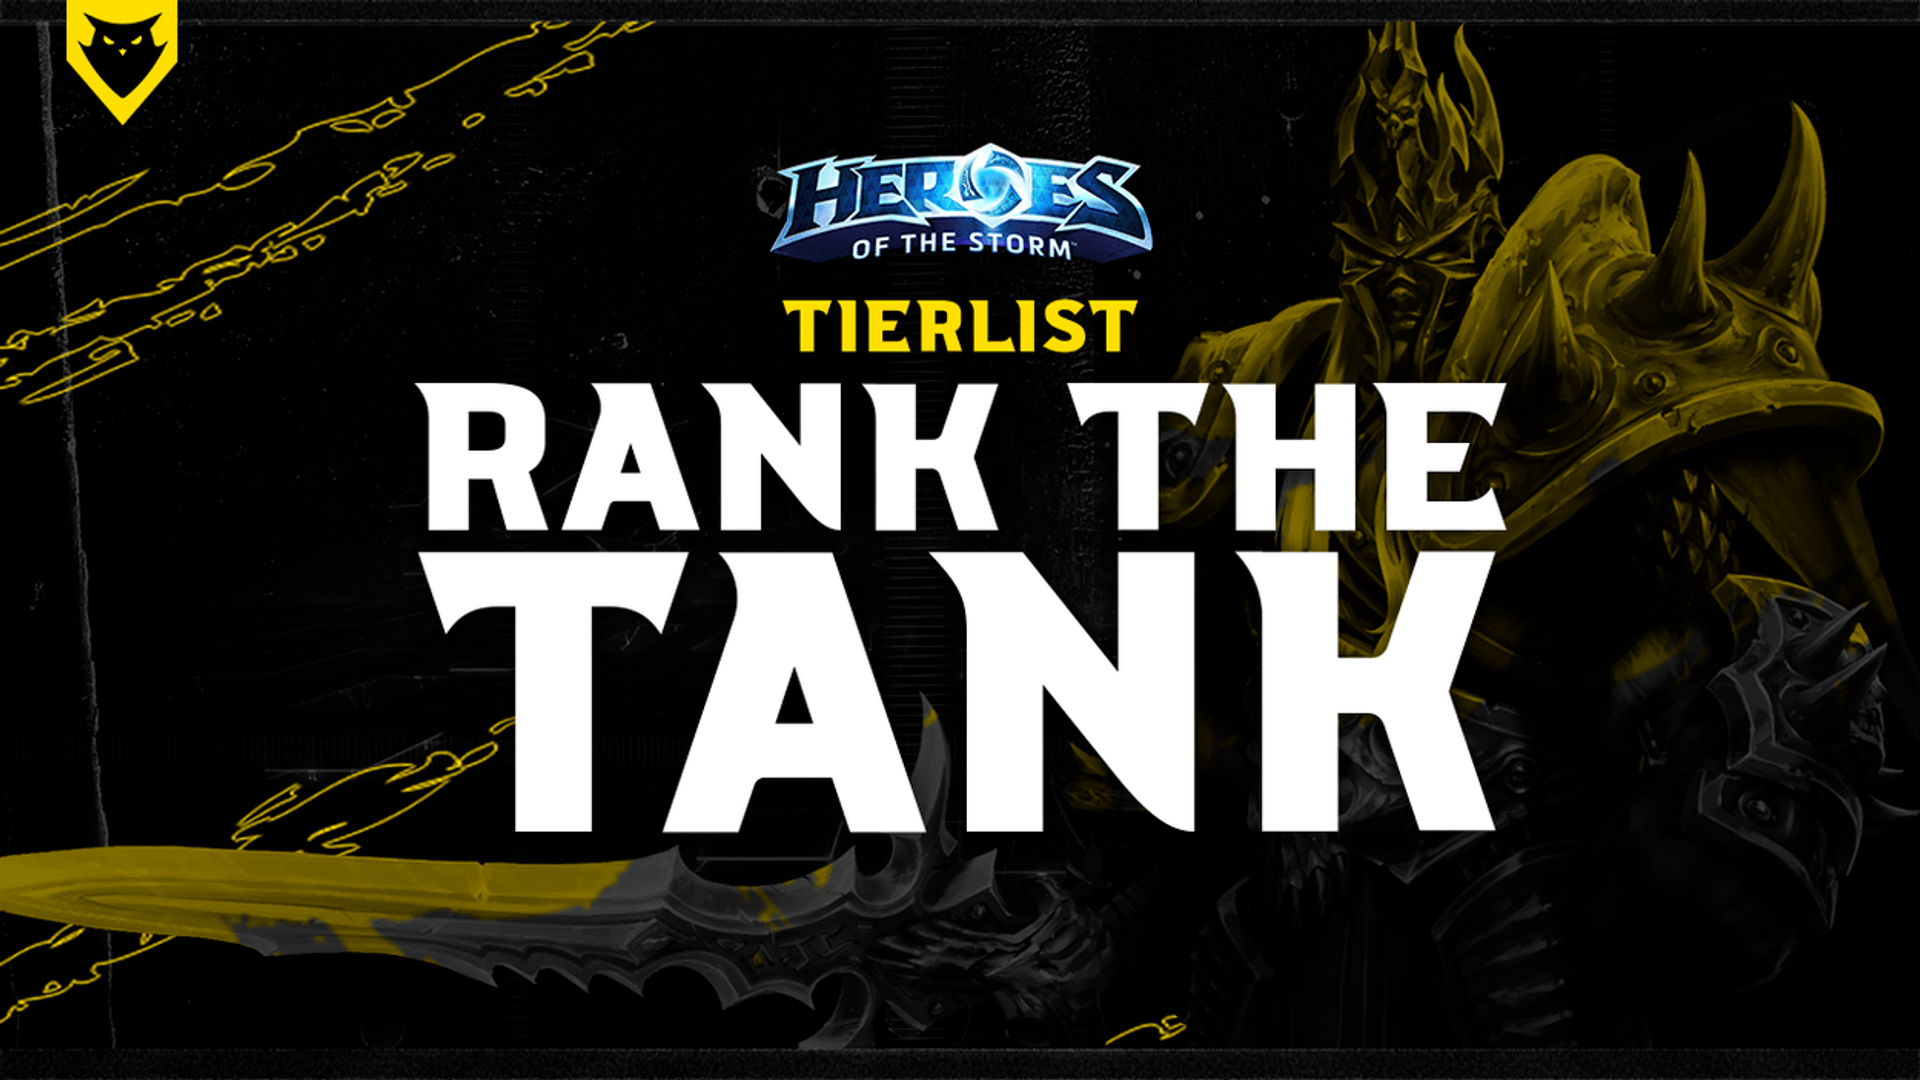 Heroes of the Storm Map-based Tier Lists - Heroes of the Storm